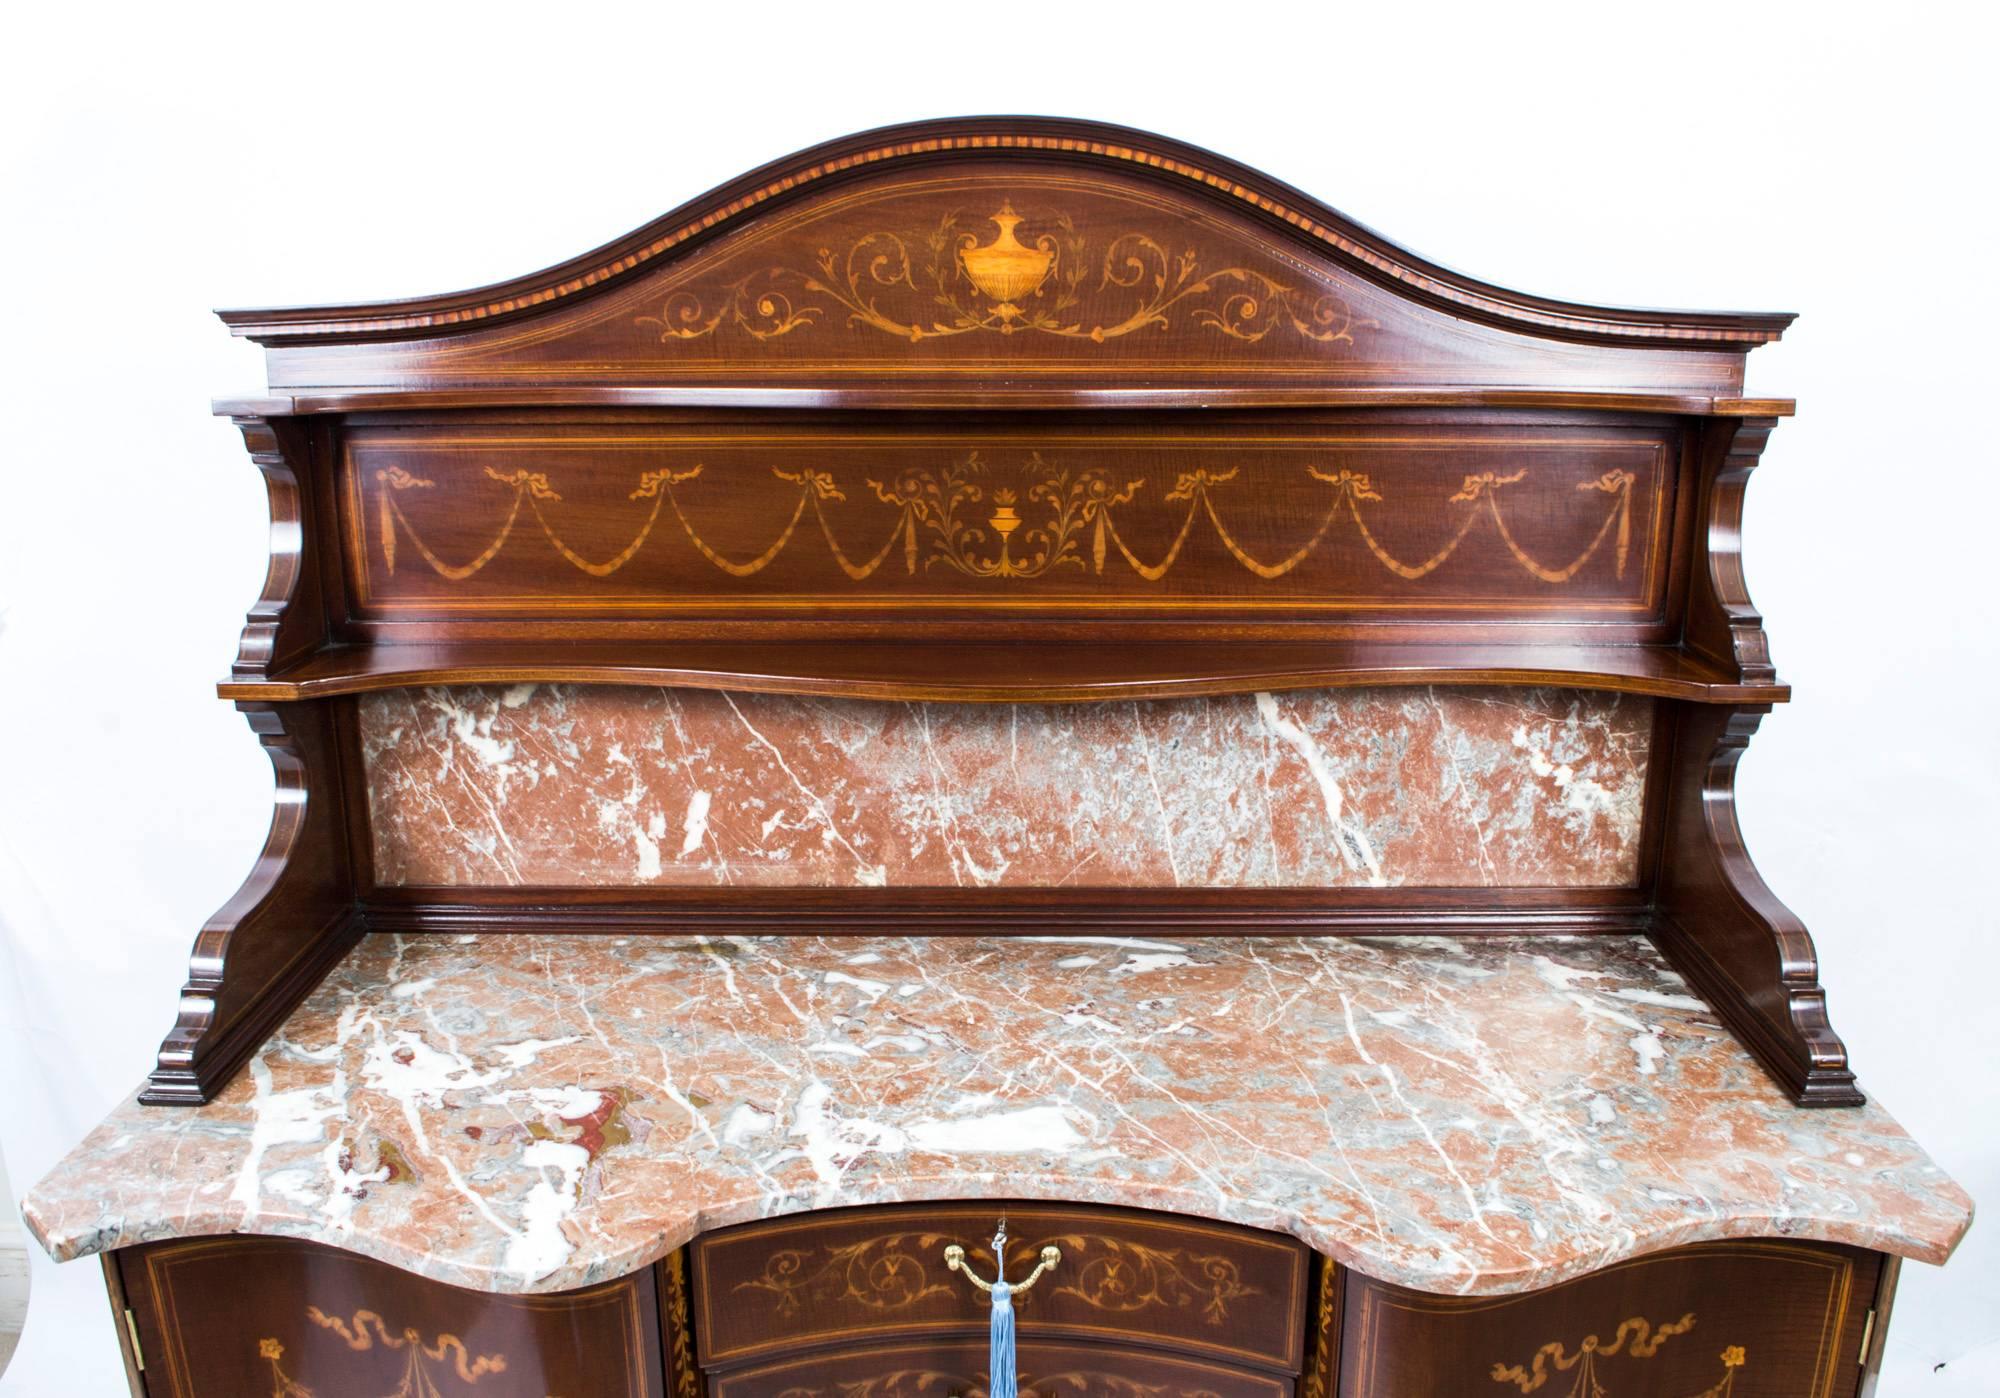 This is a spectacular antique late Victorian mahogany and floral marquetry washstand by the renowned cabinet maker and retailer Edwards & Roberts, circa 1880 in date.

It is inlaid with a beautiful marquetry of scrolls and foliage in satinwood